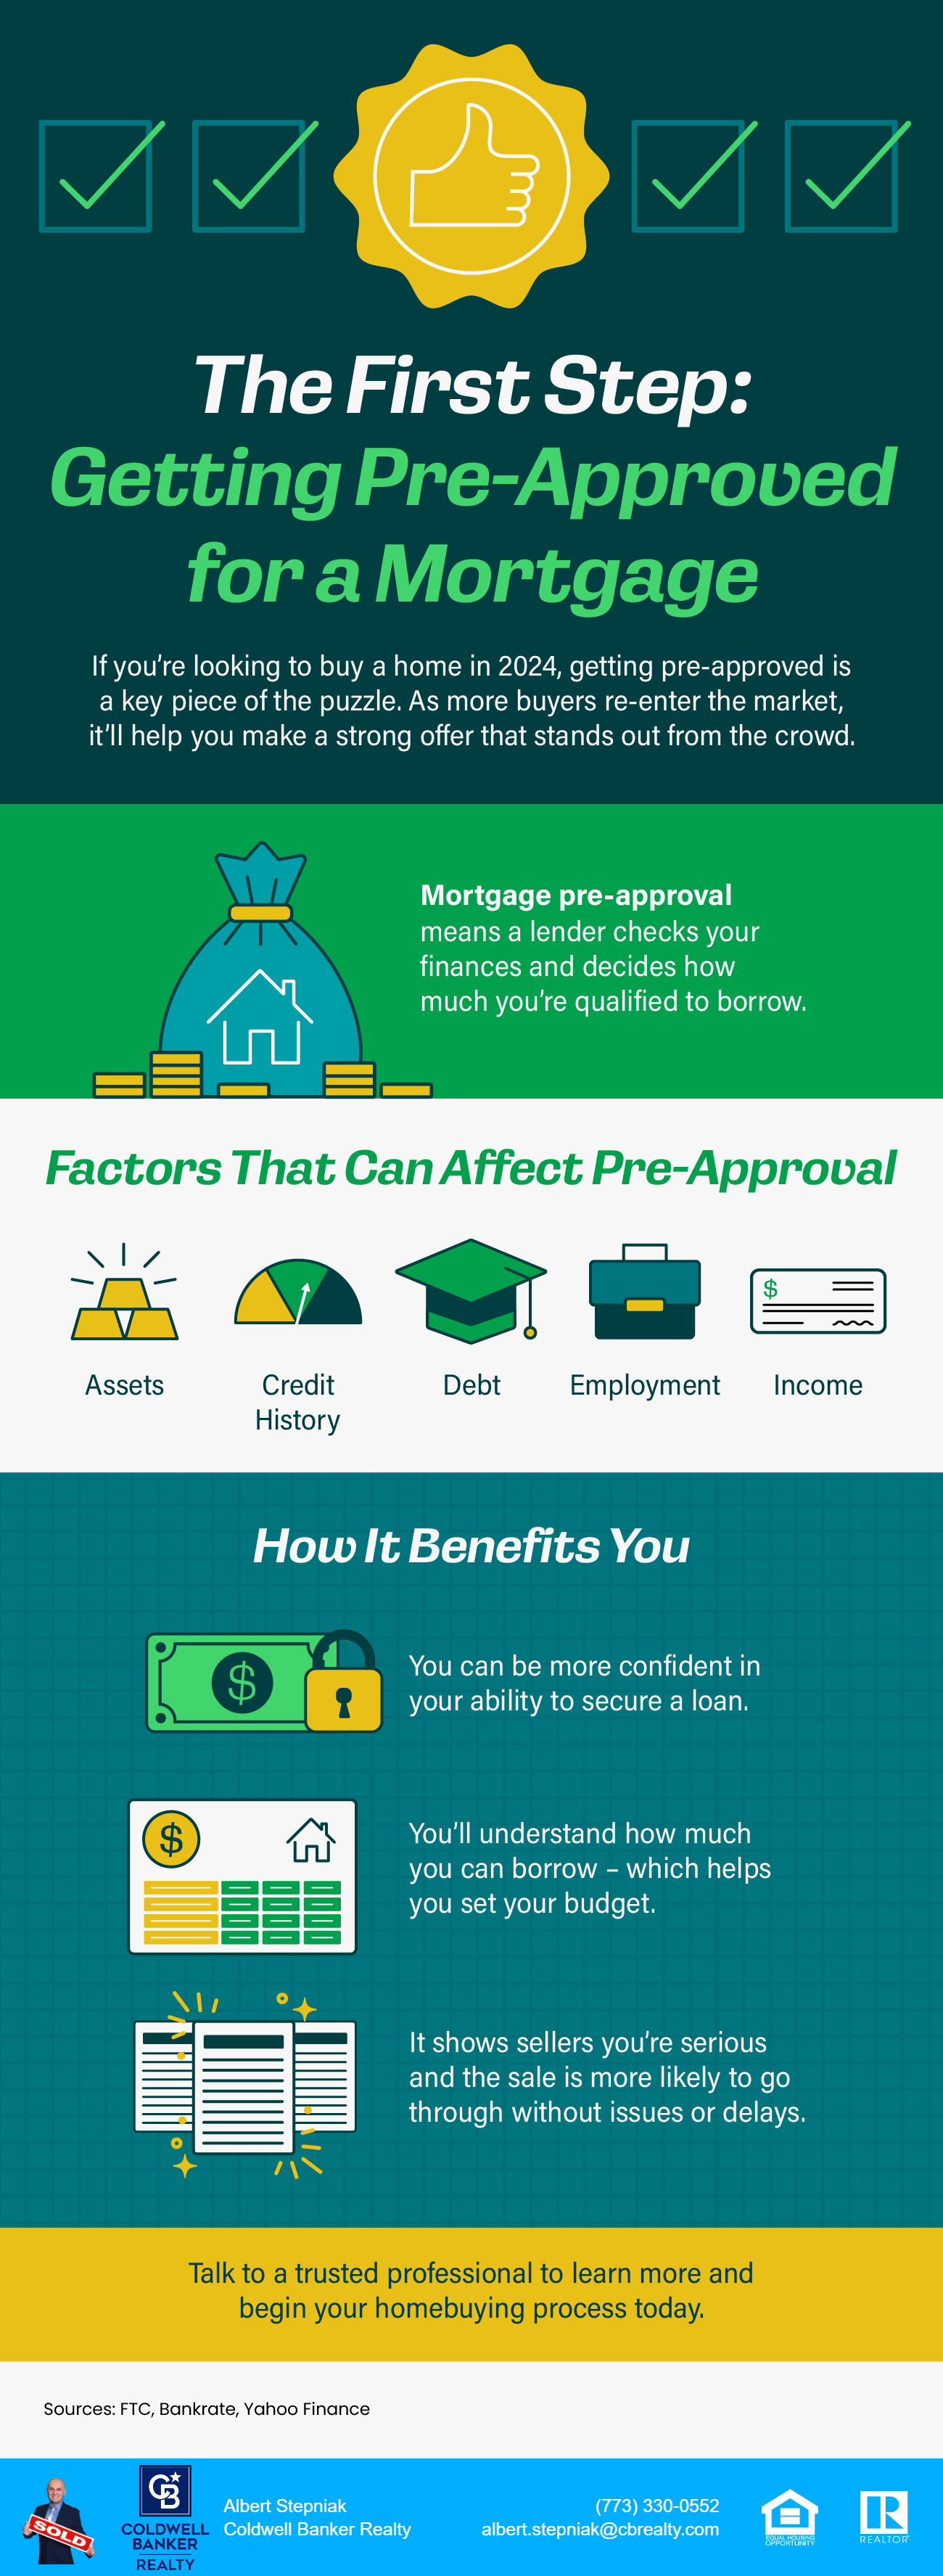 The First Step: Getting Pre-Approved for a Mortgage